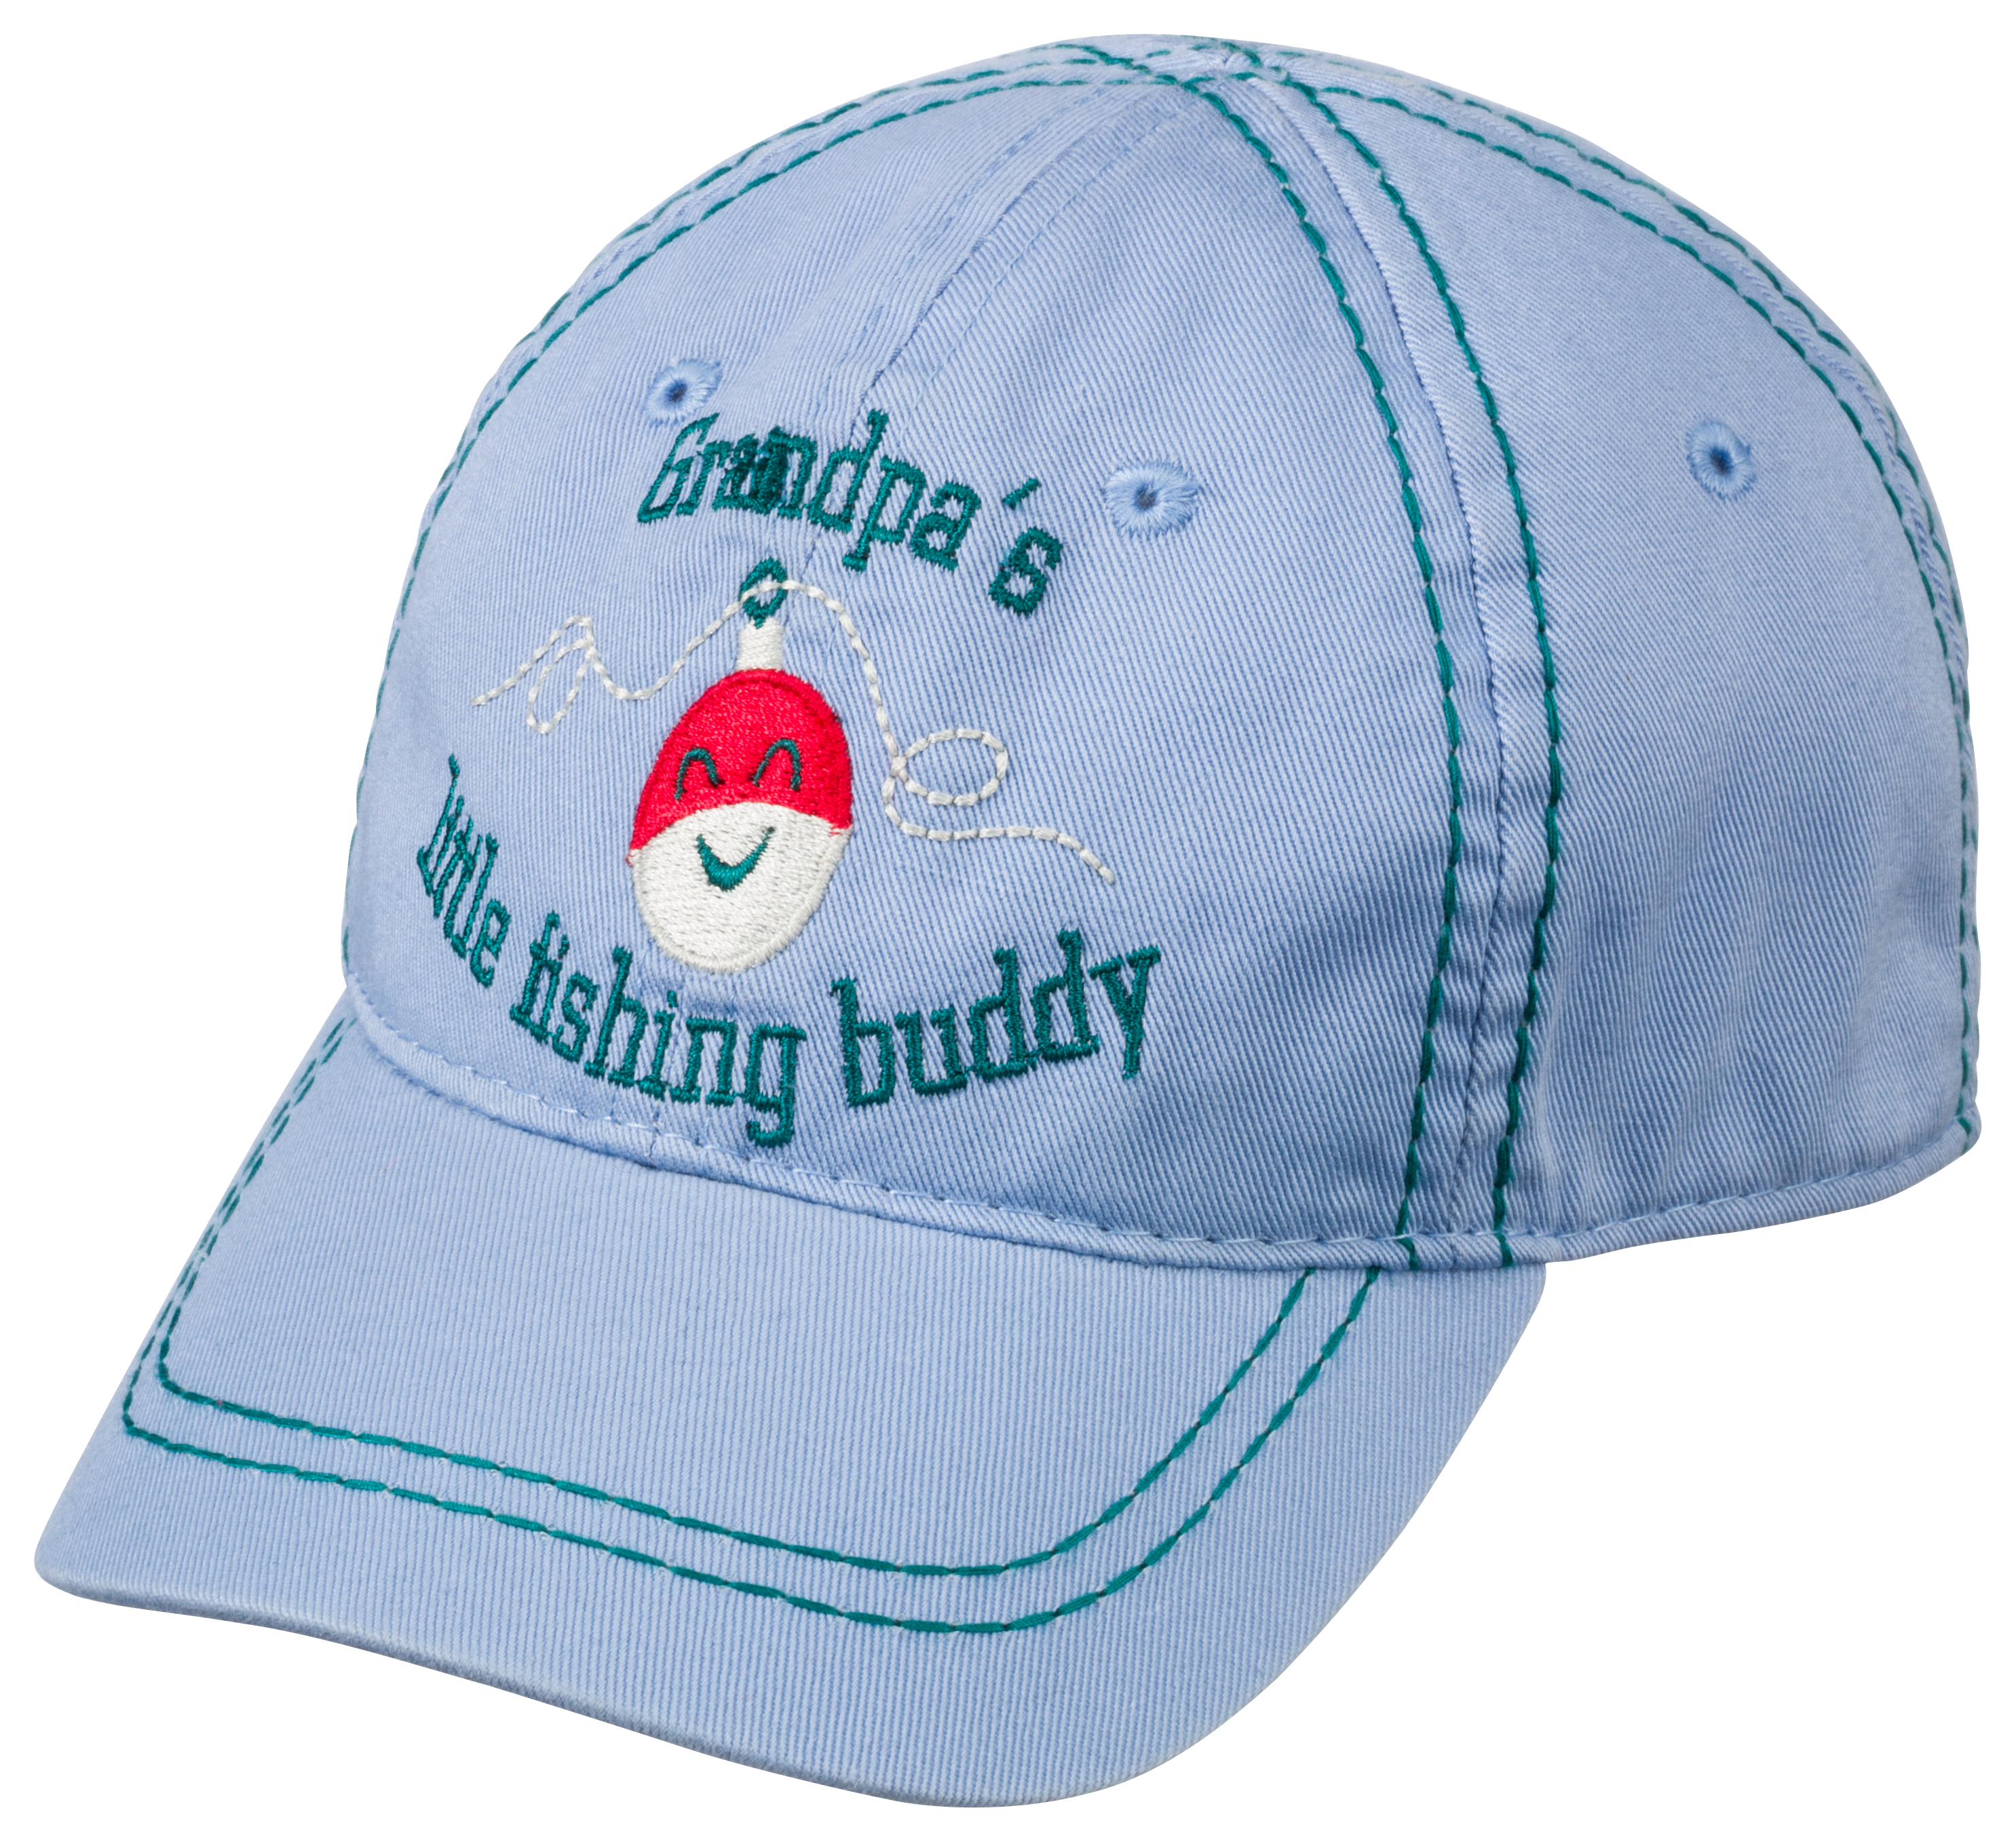 Bass Pro Shops Instant Fishing Buddy Just Add Water Toddler Hat Size 2-4  Blue